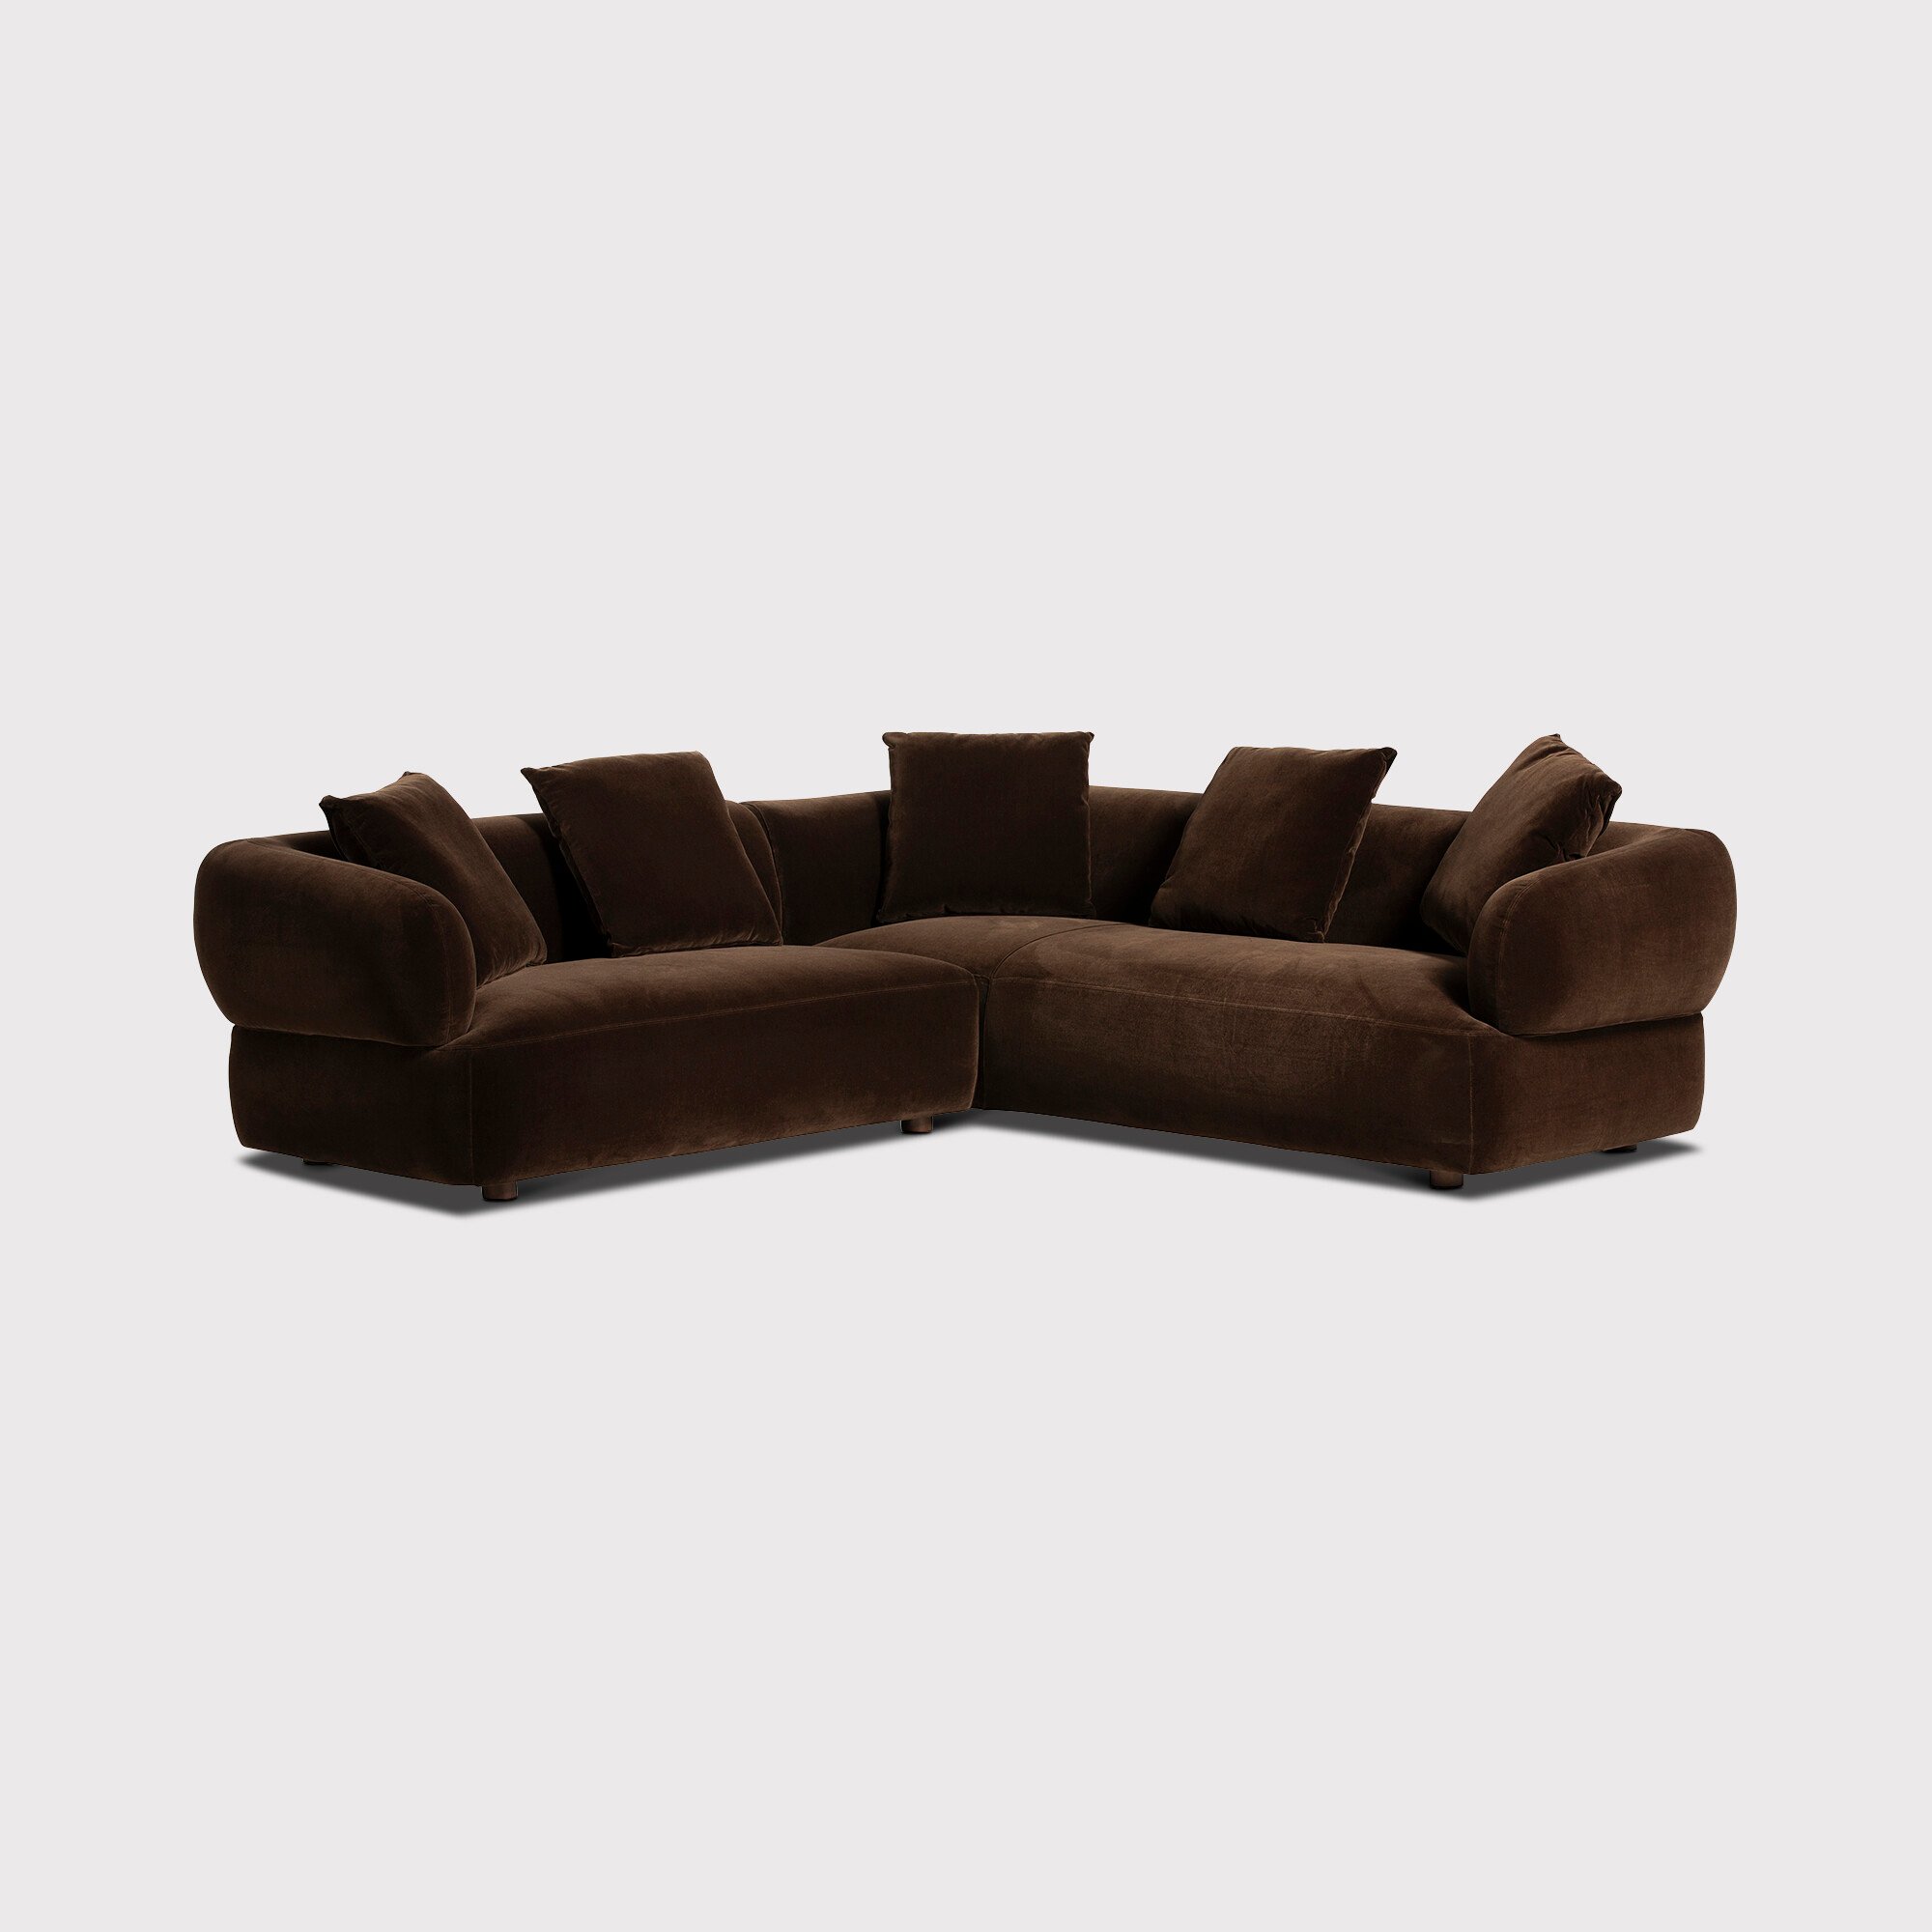 Blume 2 Seater LHF + 3 Seater Chaise Corner Sofa, Brown | Barker & Stonehouse